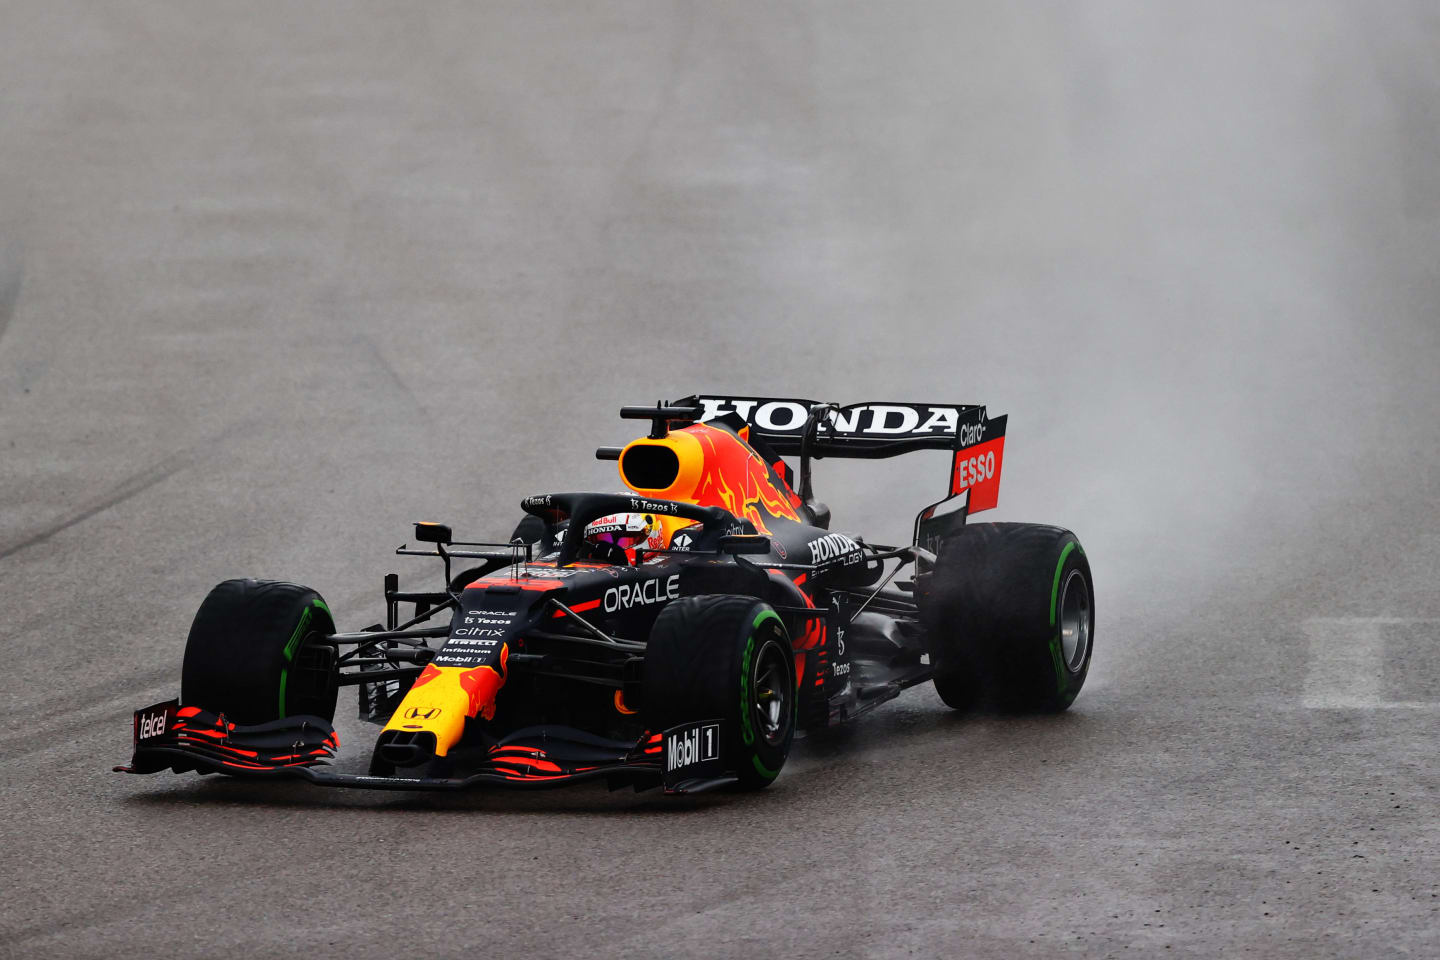 SOCHI, RUSSIA - SEPTEMBER 26: Max Verstappen of the Netherlands driving the (33) Red Bull Racing